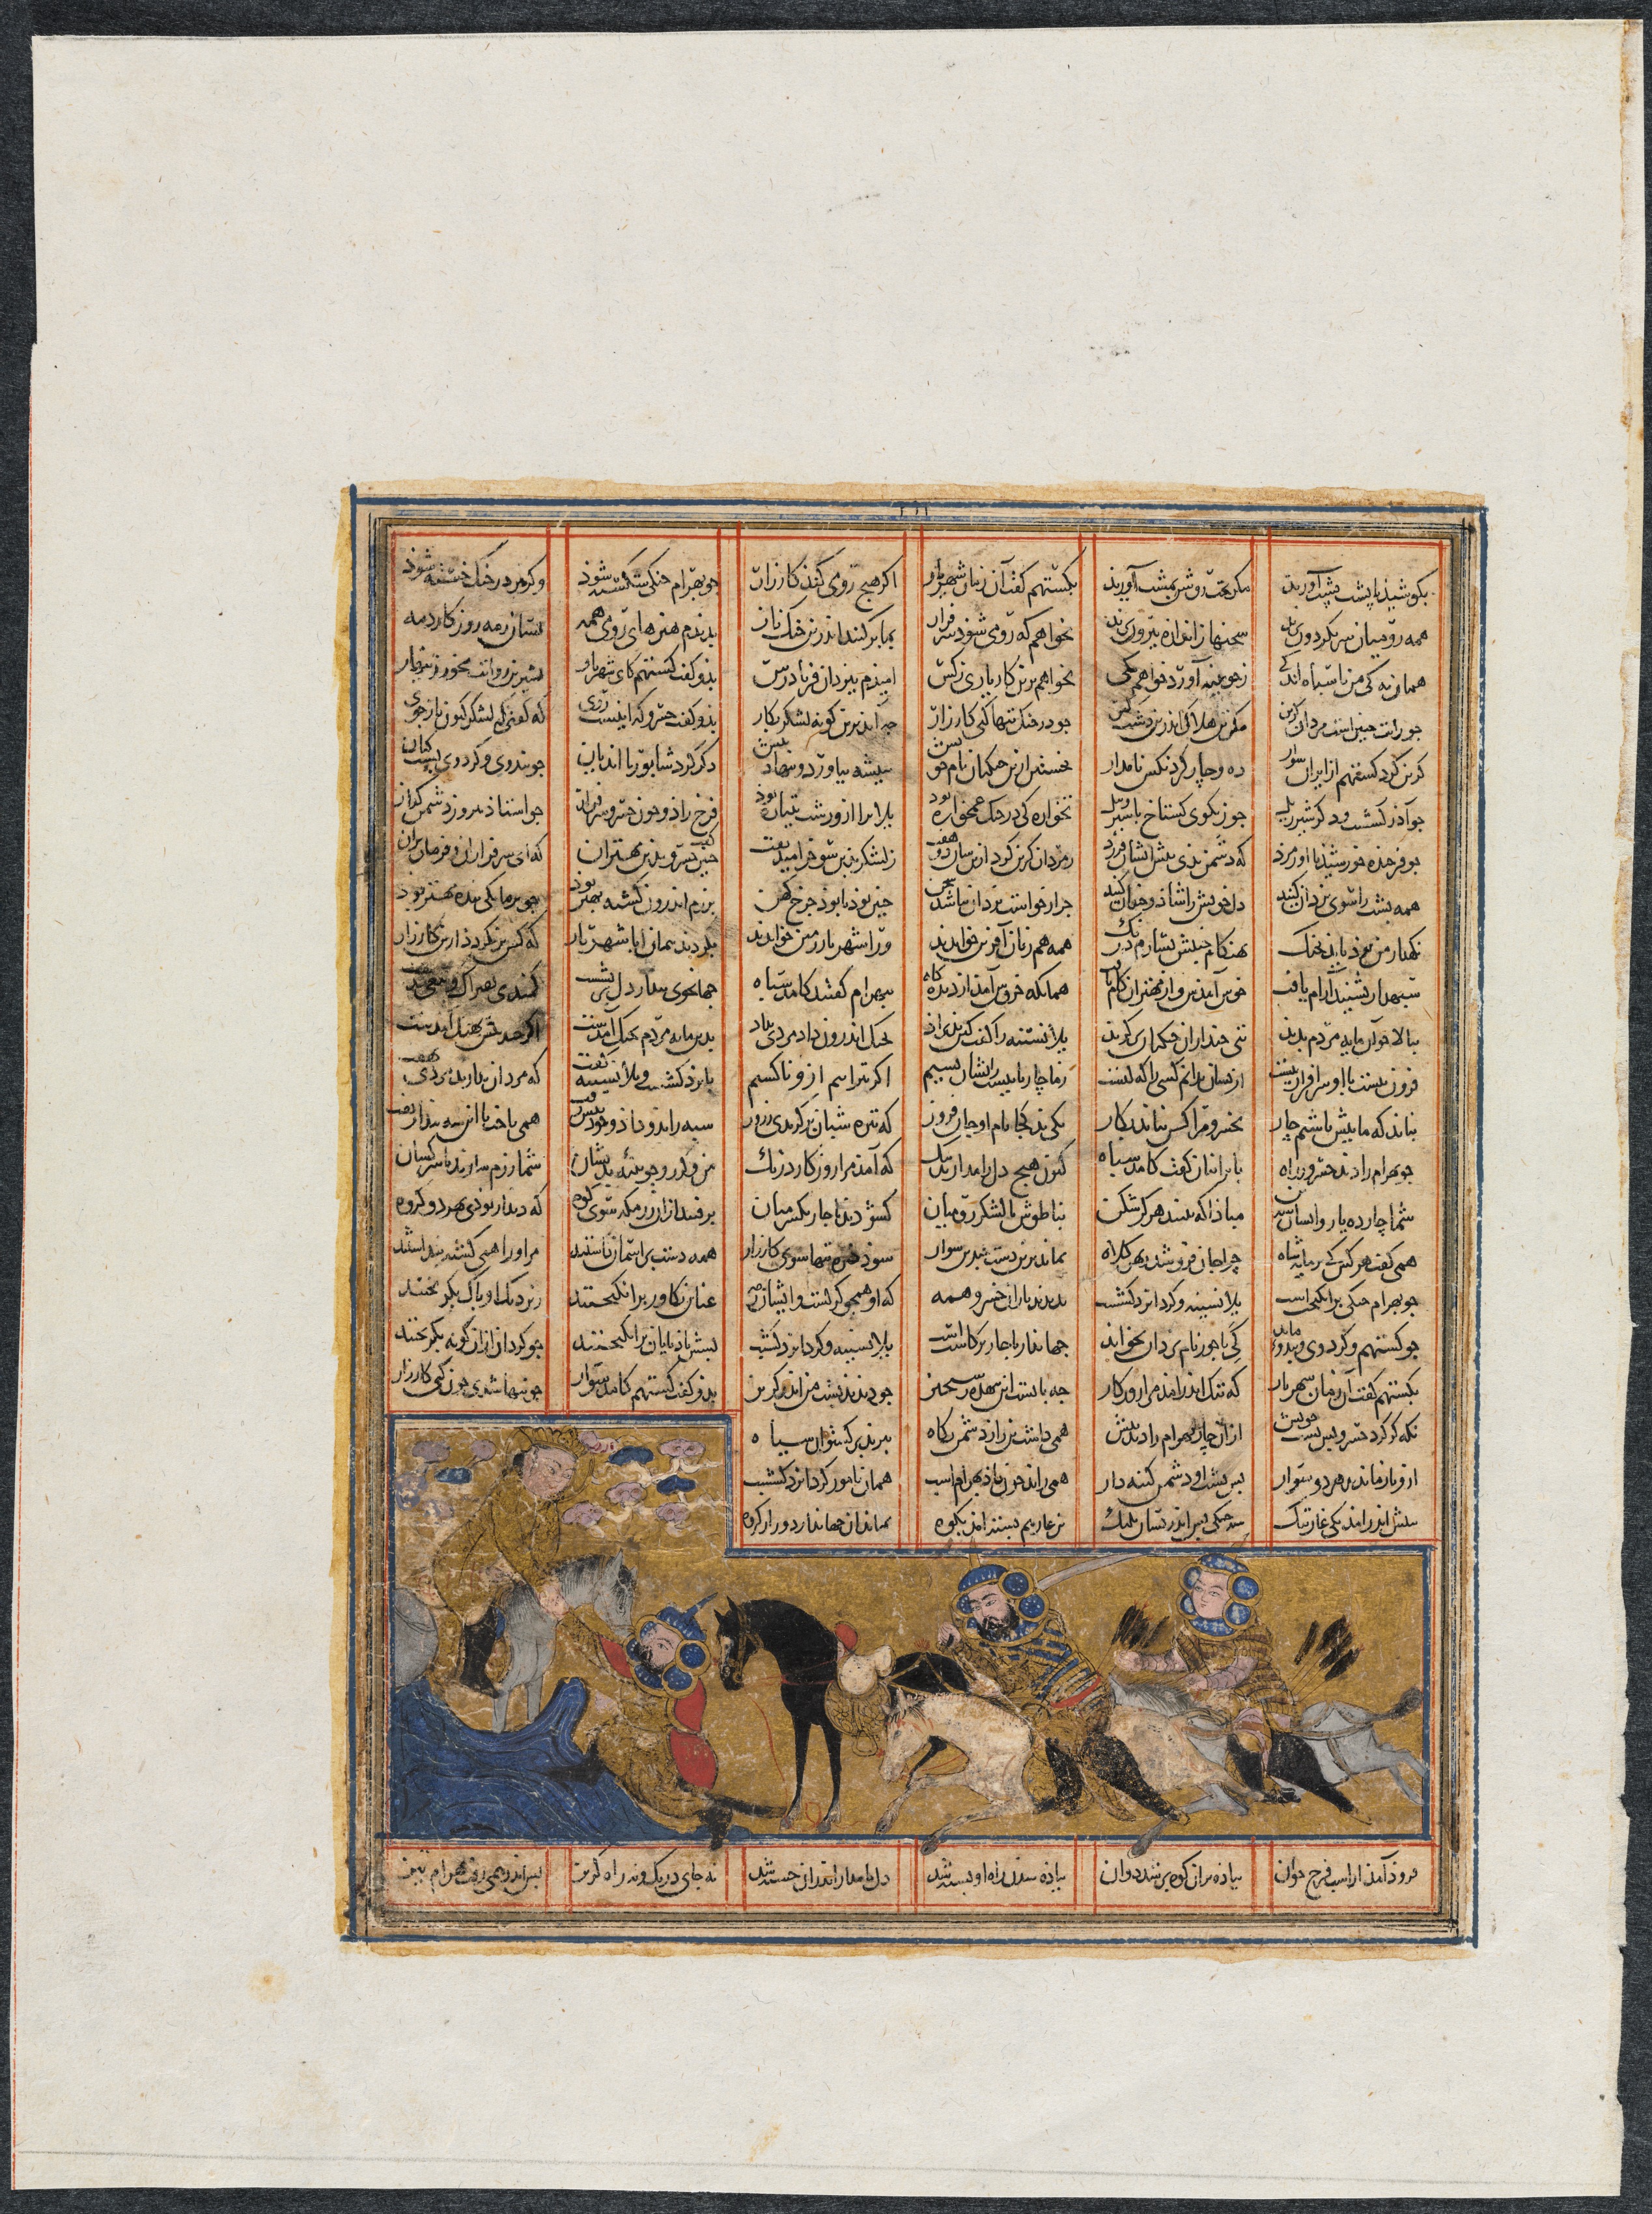 Episodes from the Reigns of Khusrau Parviz and Nushirwan from a Shahnama (Book of Kings) of Firdausi (940–1019 or 1025)